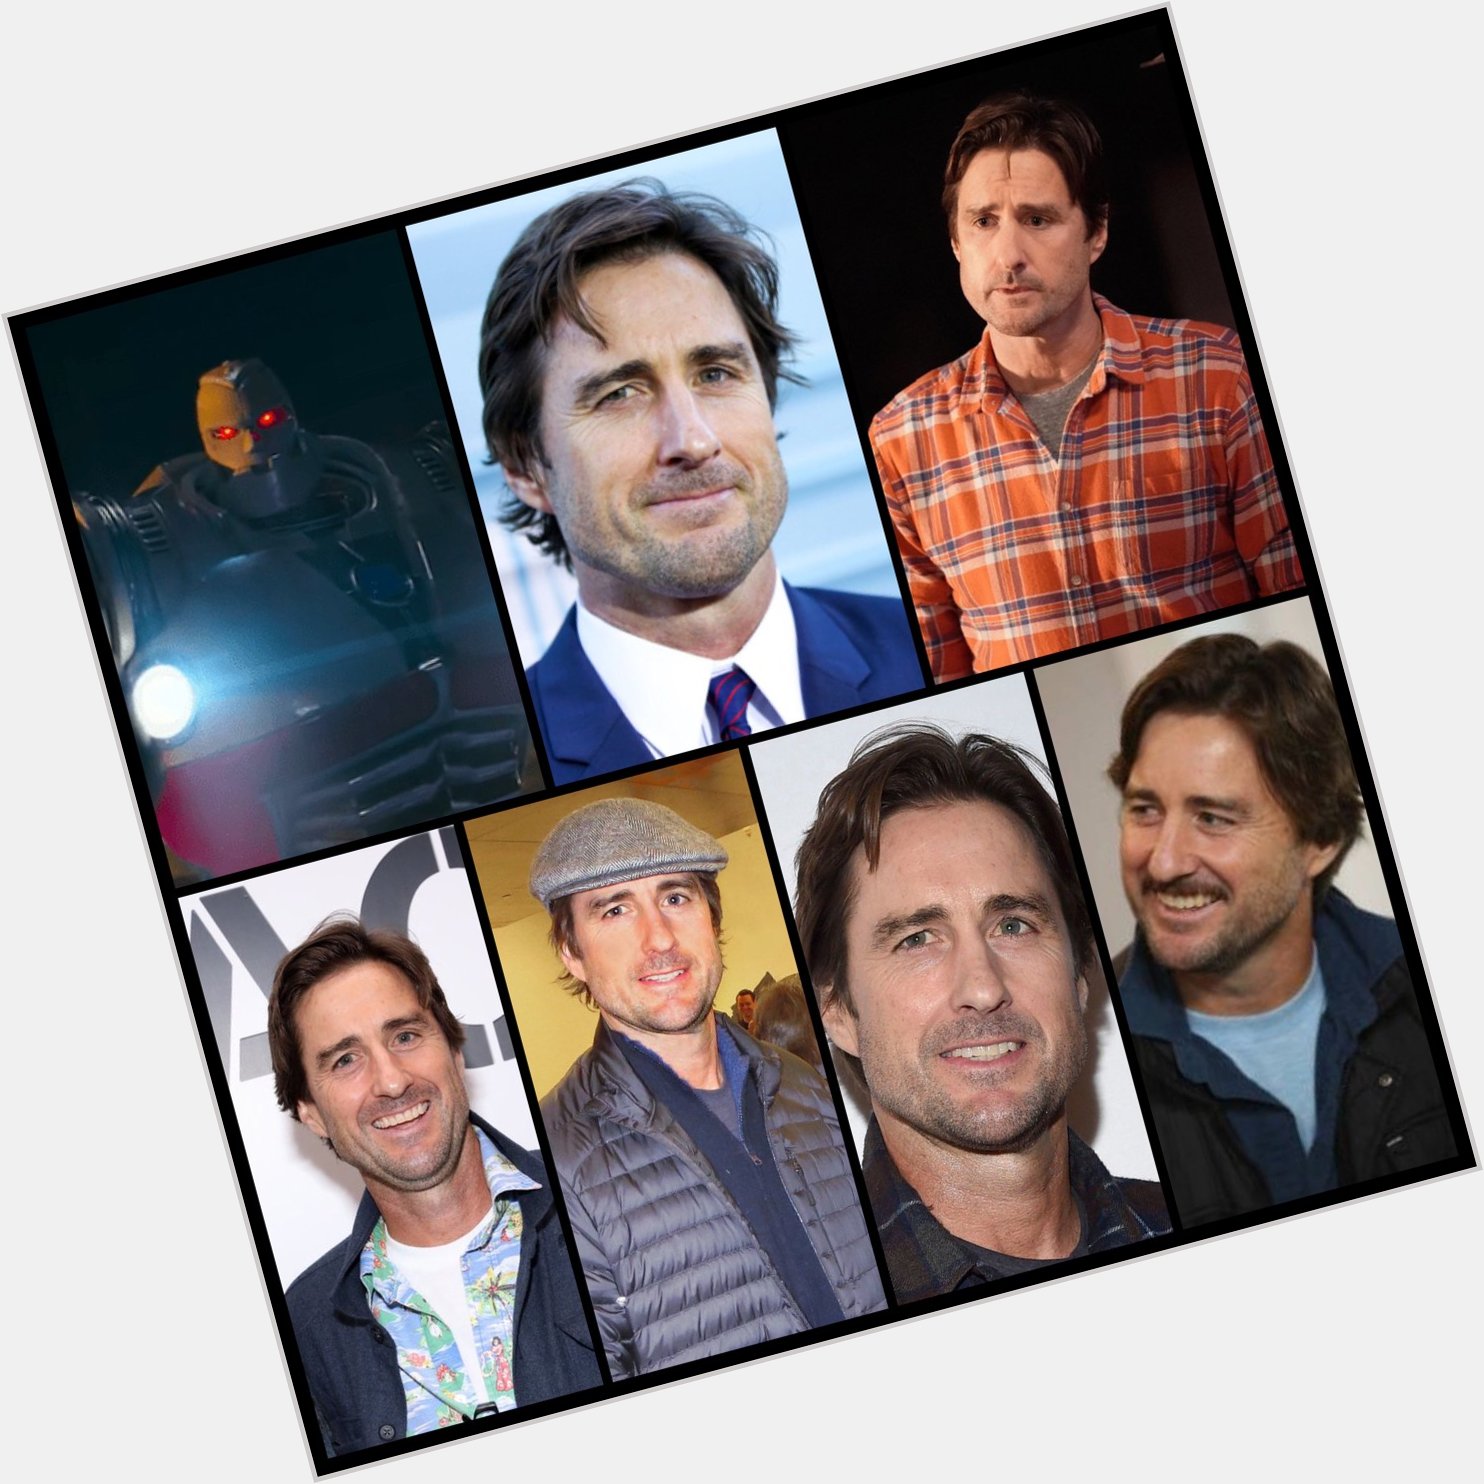 Wishing a Happy Birthday to Luke Wilson! I hope you have an amazing day, and may your wishes come true!    